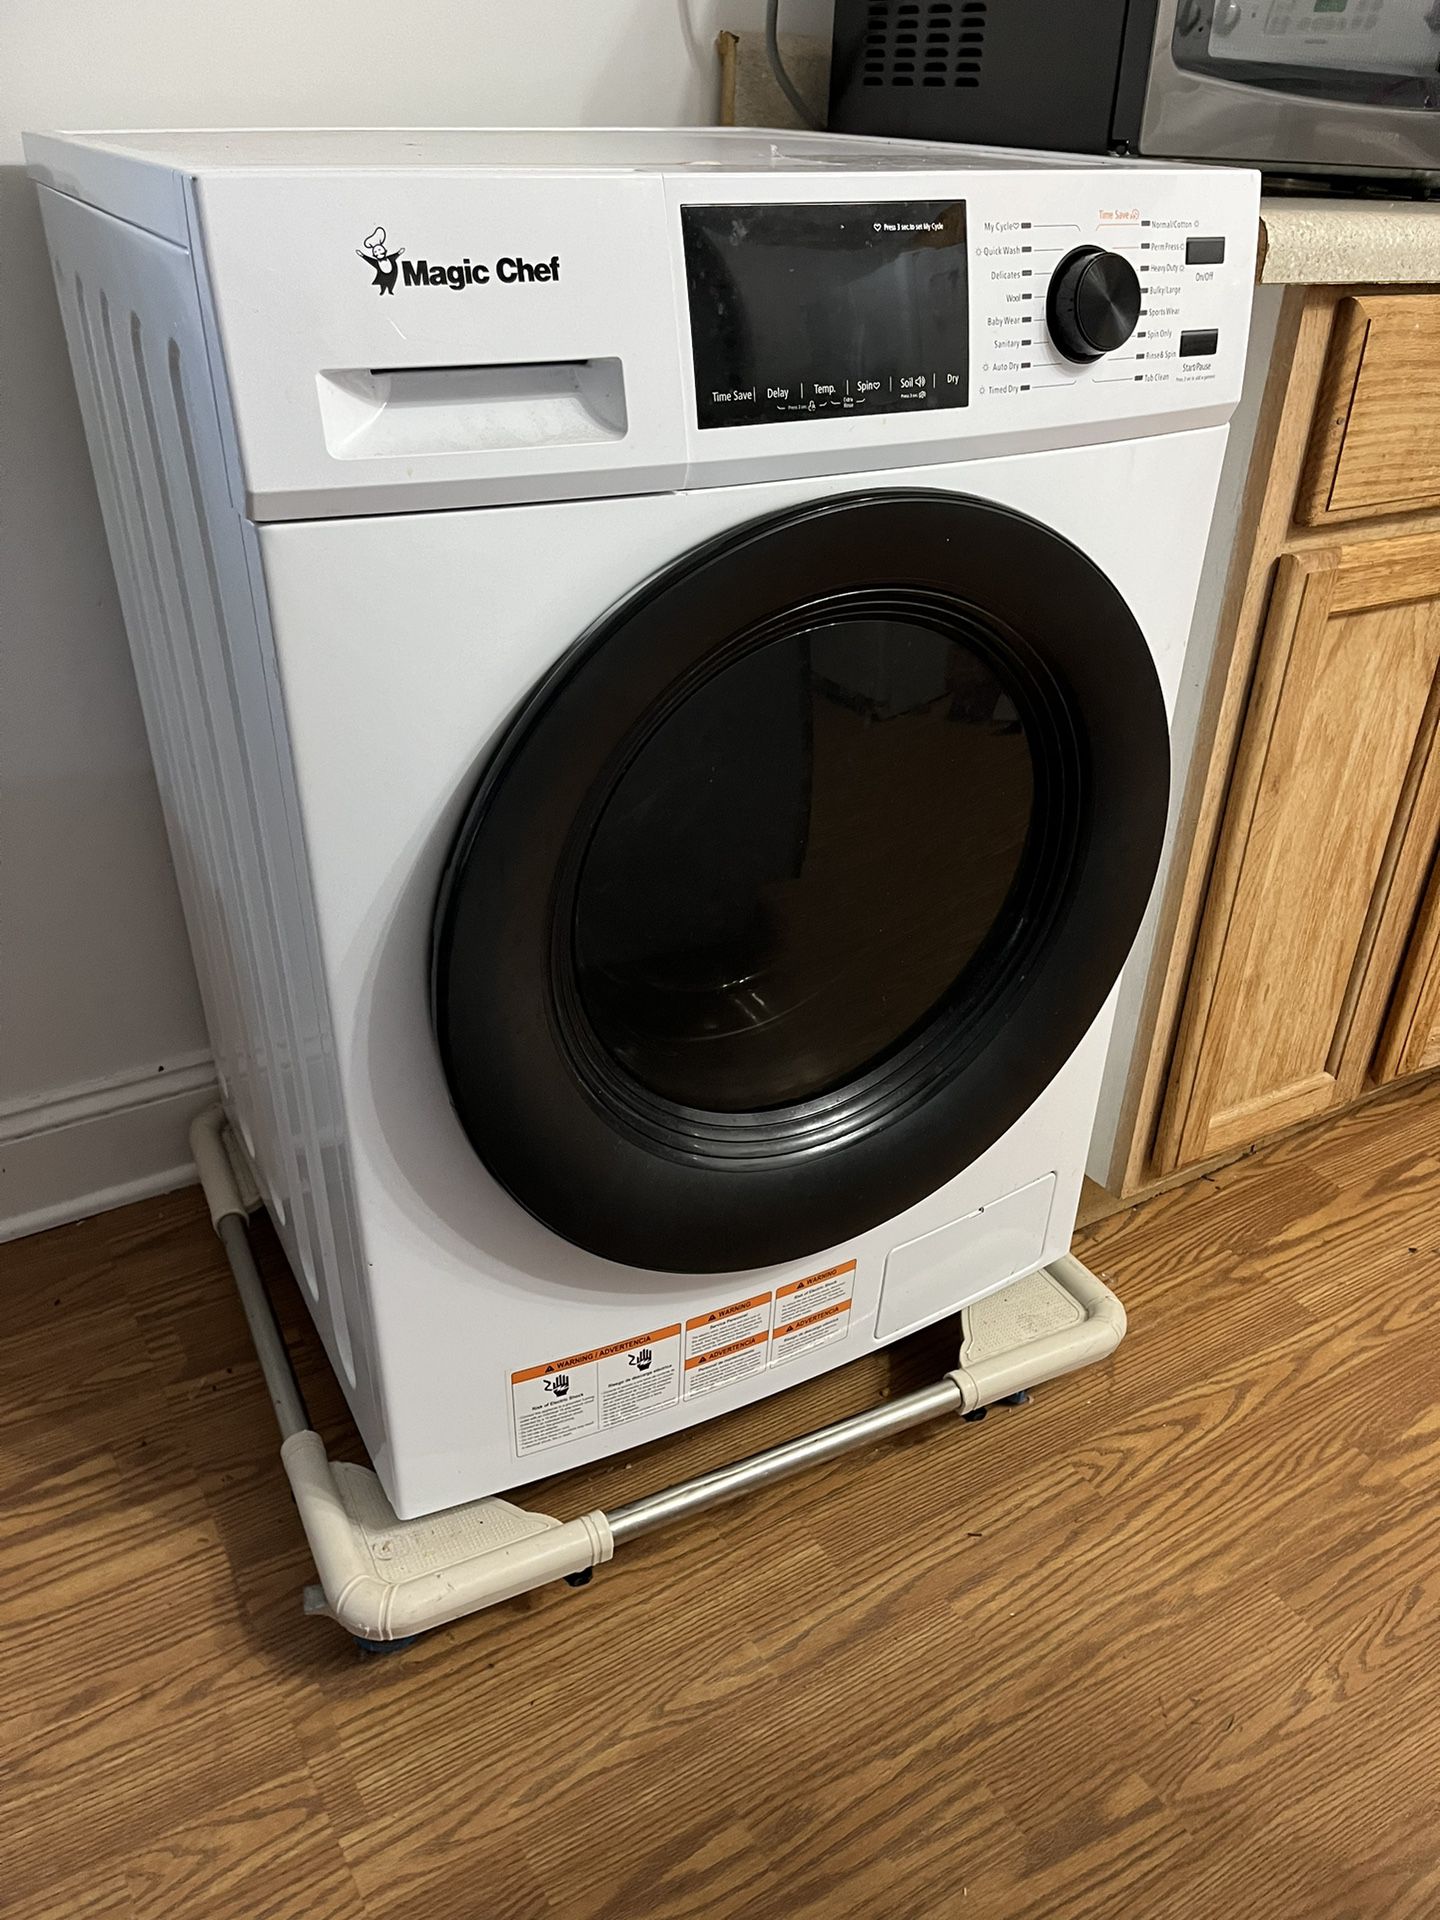 Portable Magic Chef Washer Dryer Combo